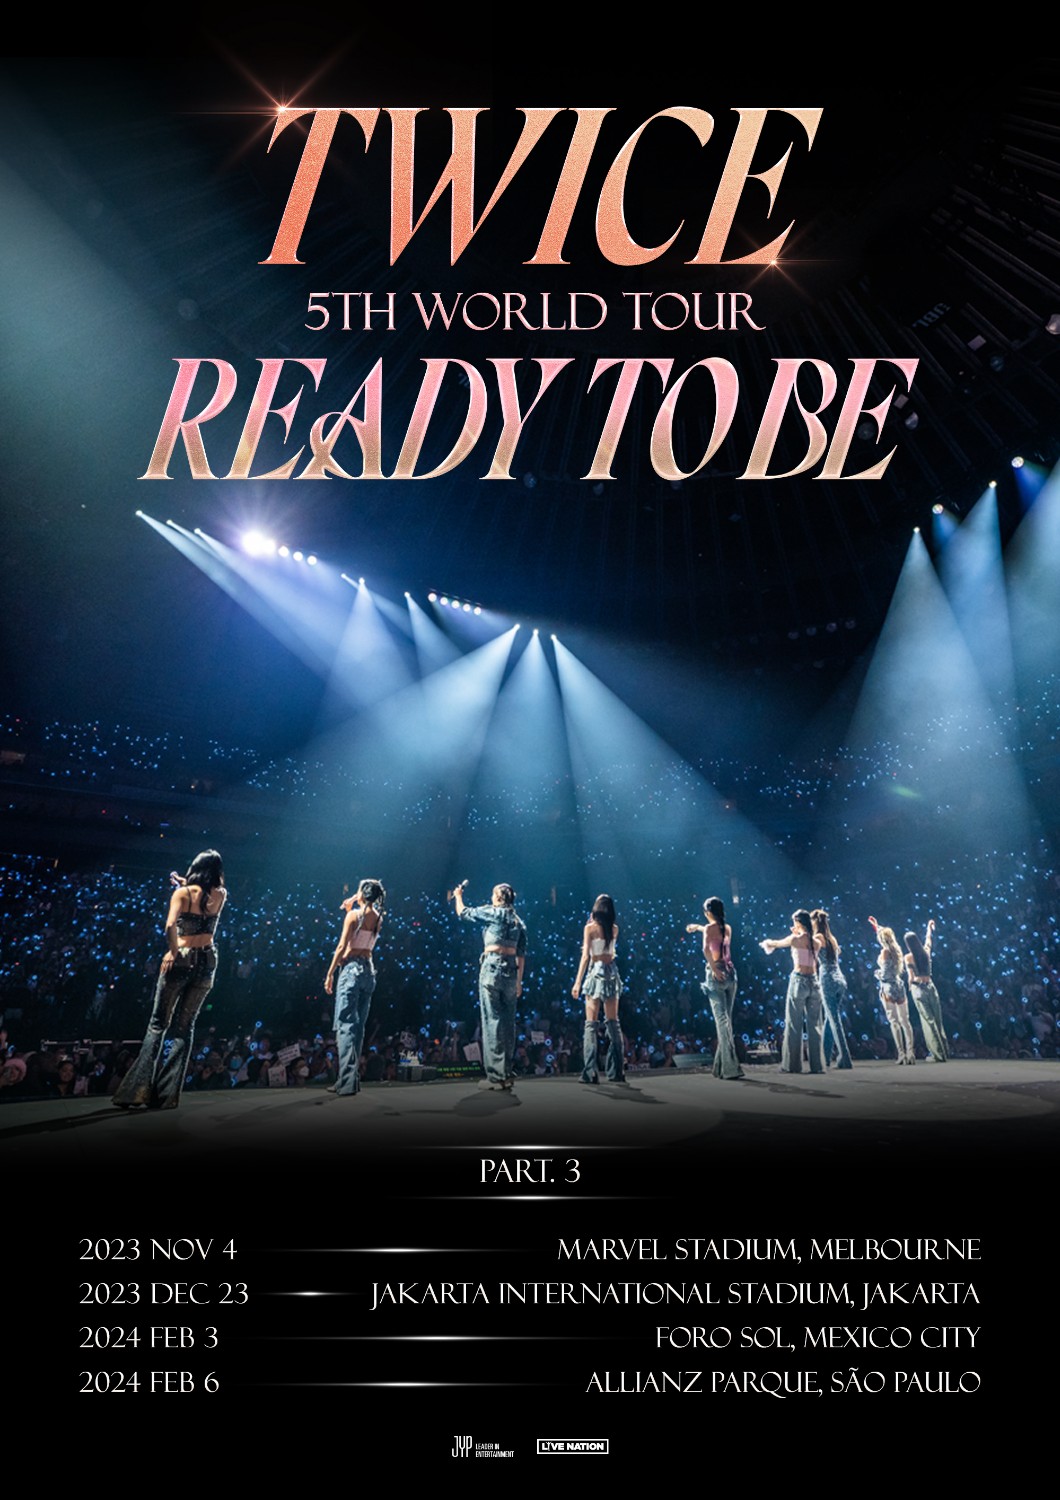 TWICE 5TH WORLD TOUR ‘READY TO BE’ ANNOUNCEMENT PART.3 Pantip